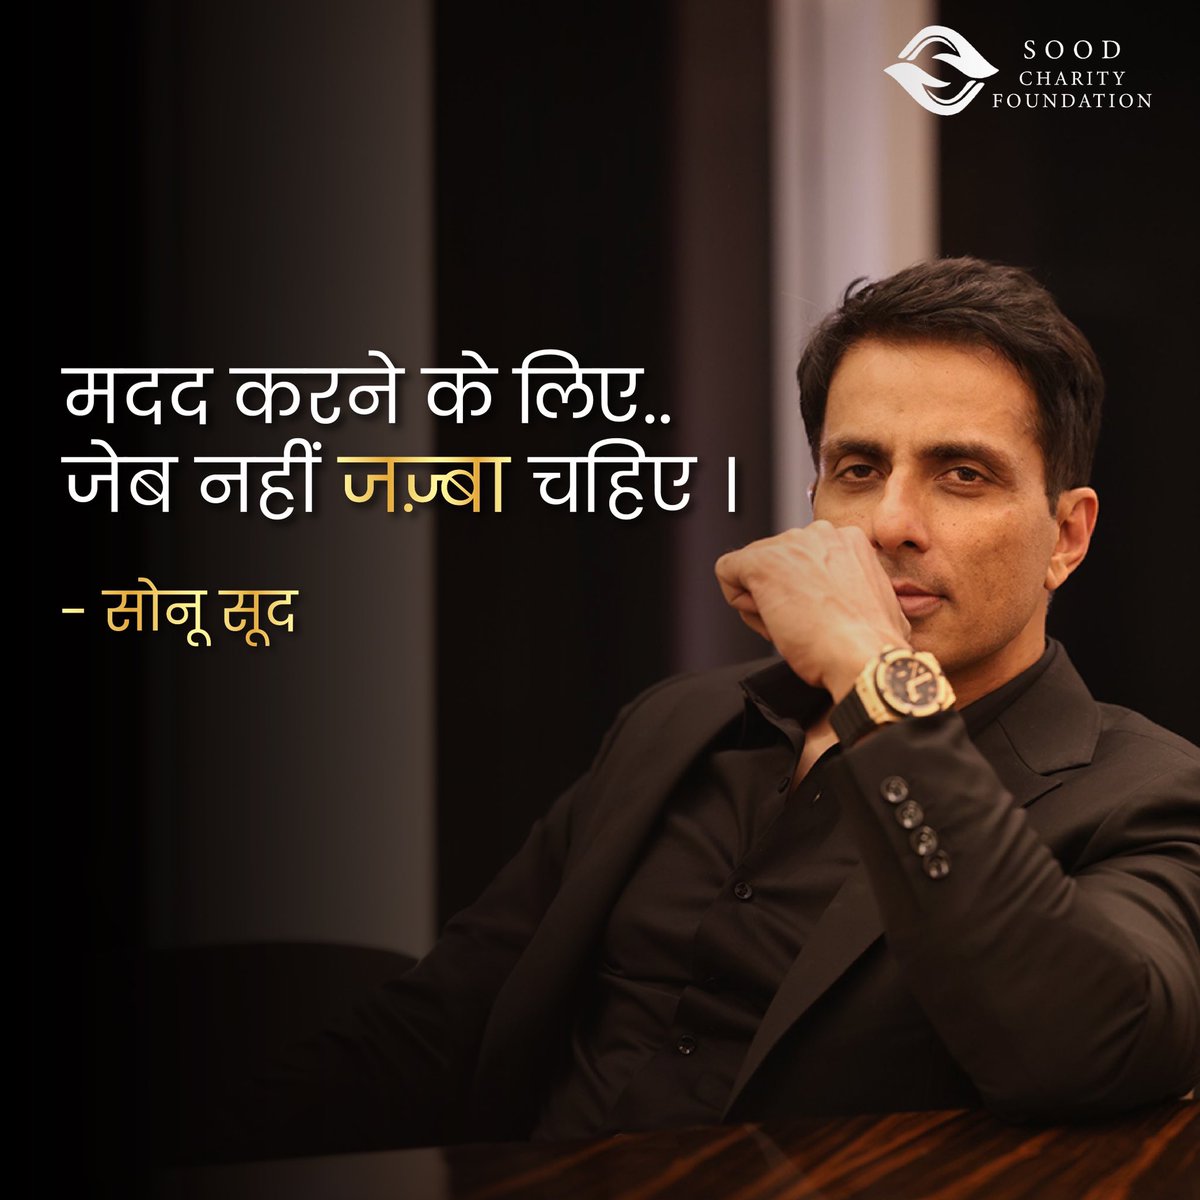 From the heart of our founder @SonuSood 'Empathy knows no bounds, and compassion requires no fortune. It's about the courage to make a difference, one act of kindness at a time.' 💖

Follow us to stay connected 

#sonusood #soodcharityfoundation #GiveBack #KindnessMatters…